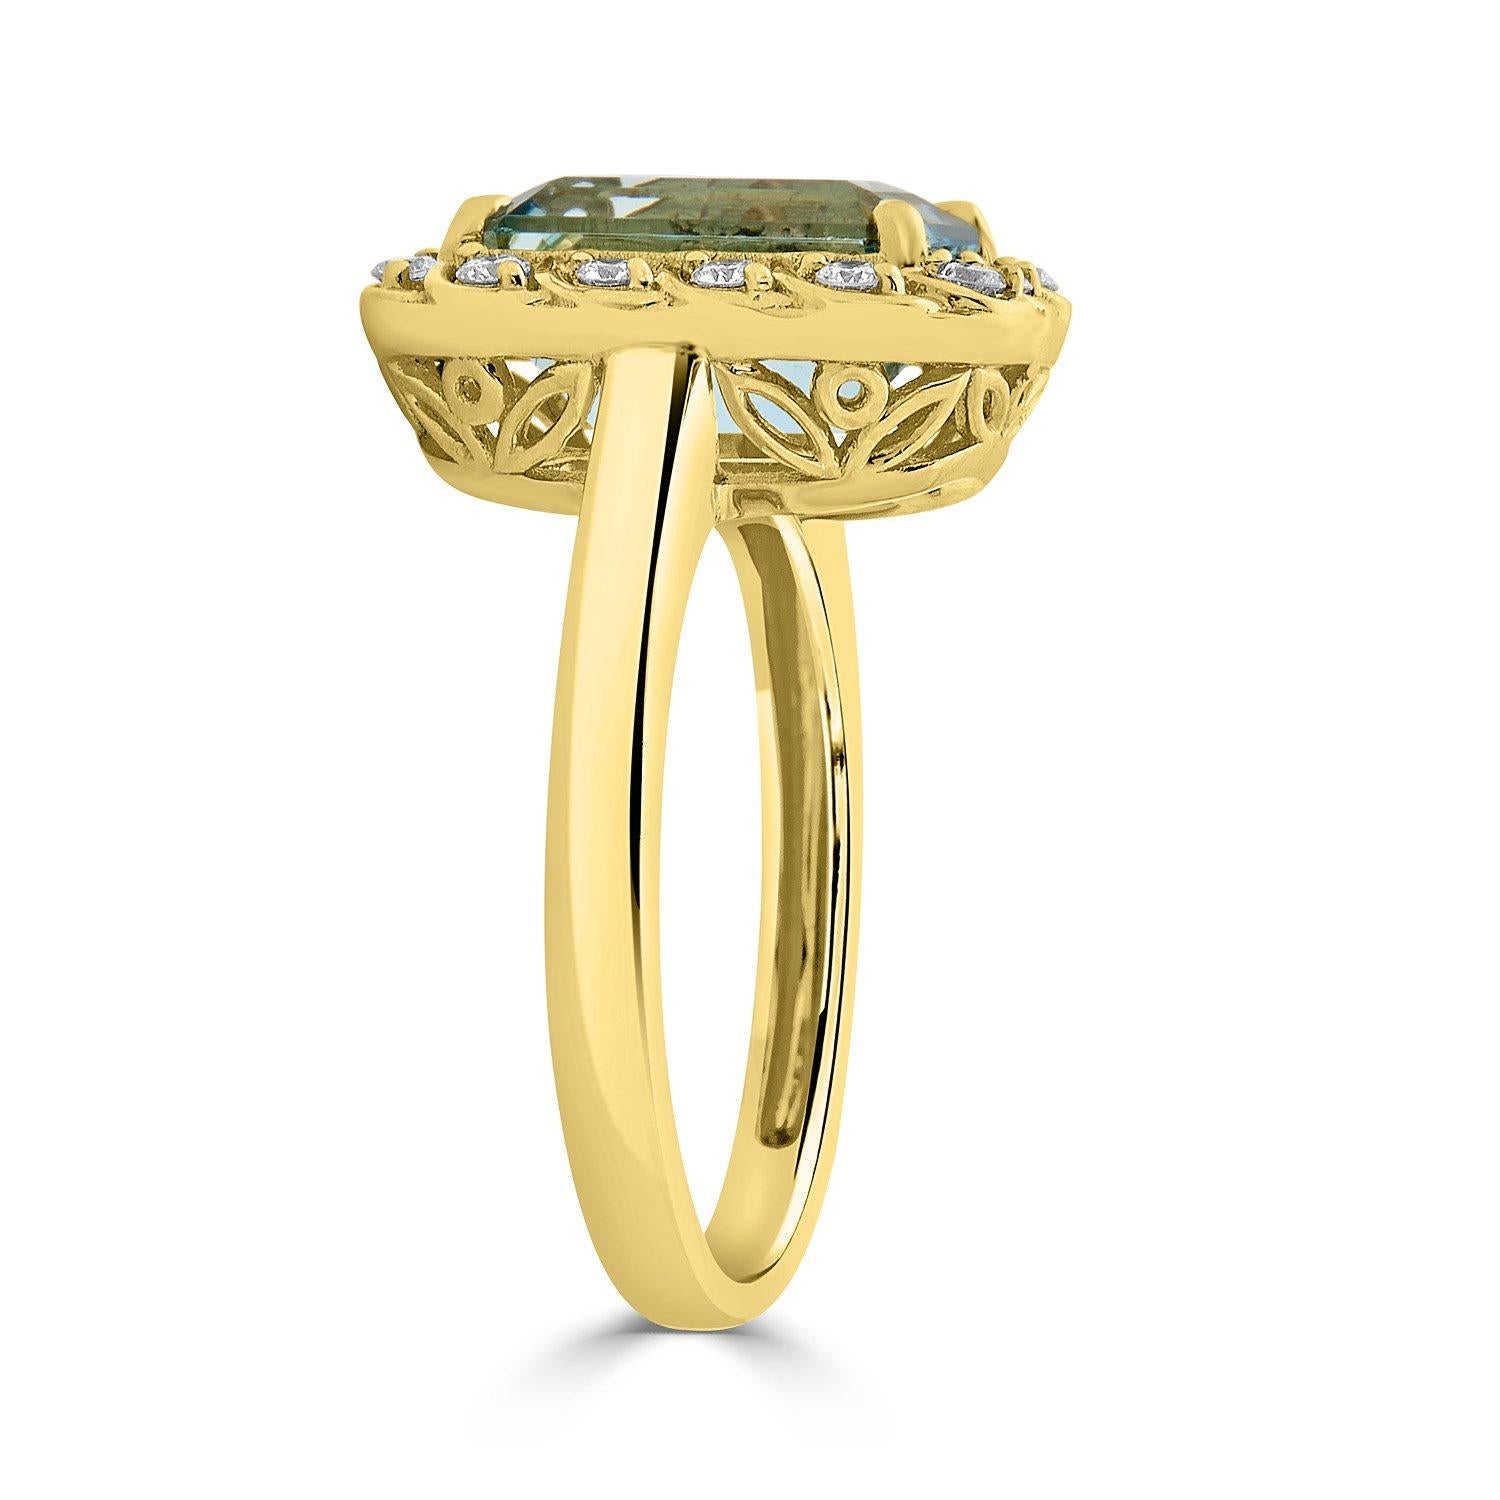 Contemporary 3.03ct Aquamarine Ring with 0.23tct Diamonds Set in 14k Yellow Gold For Sale